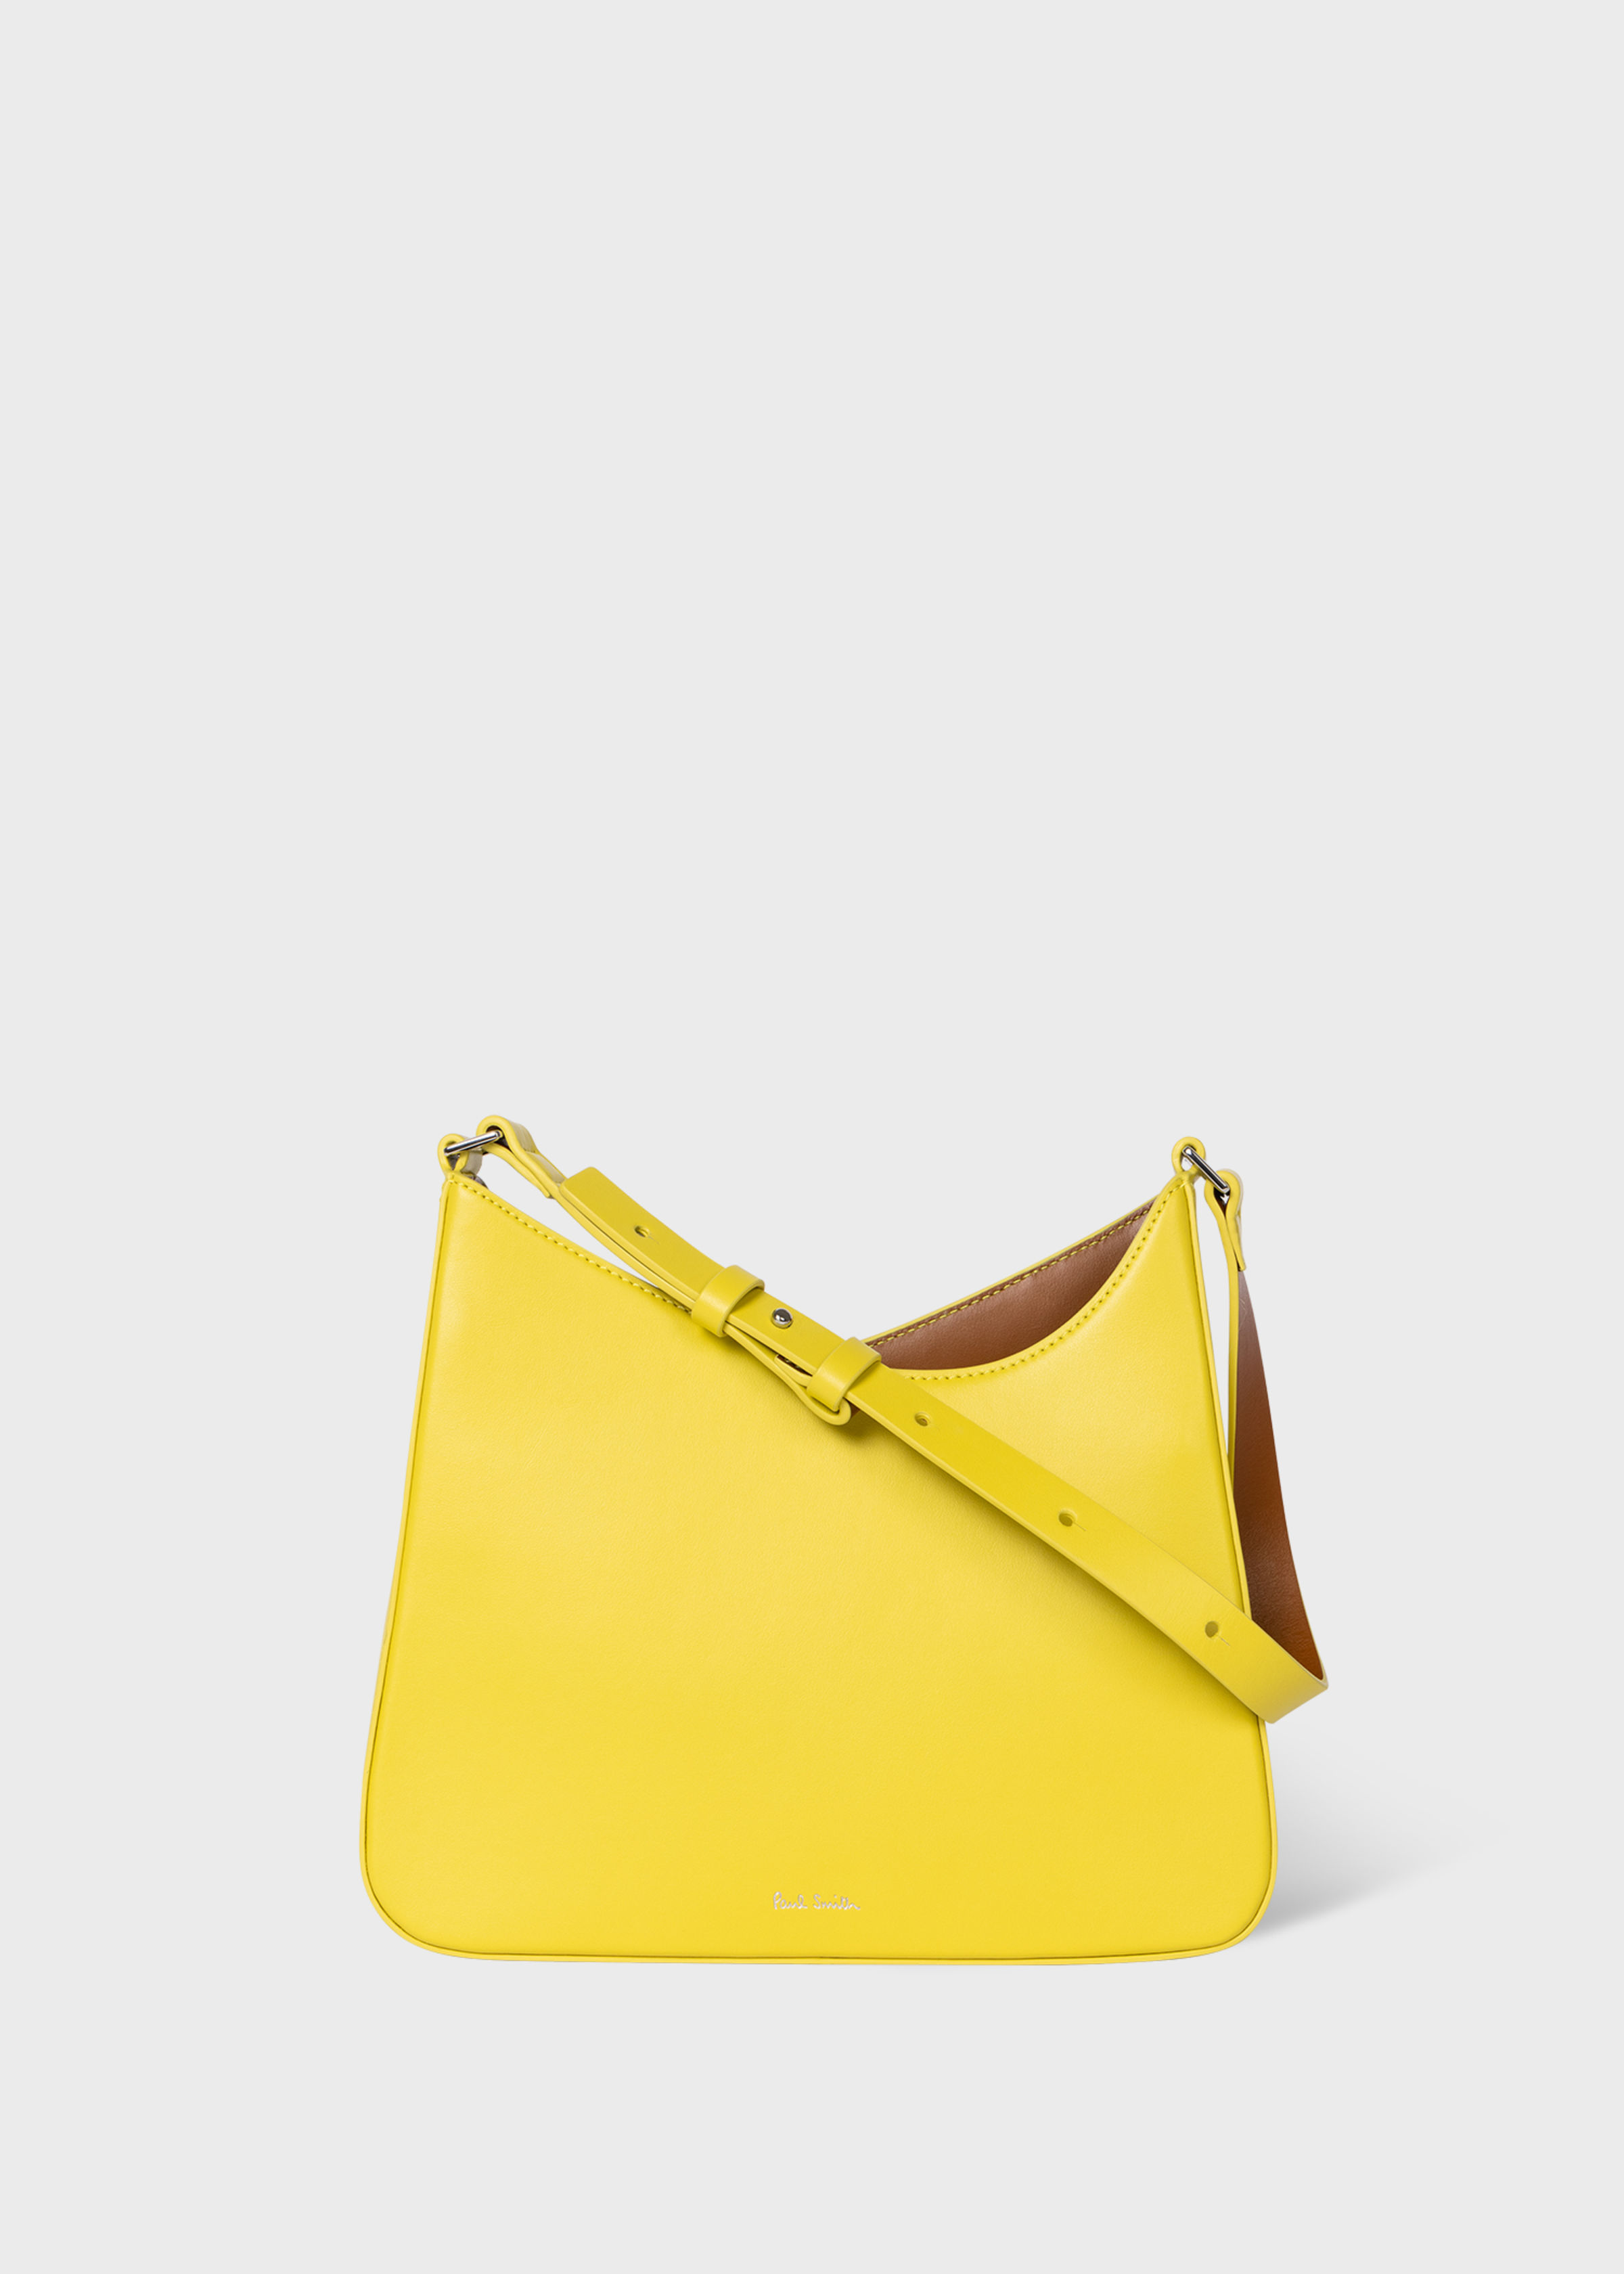 paul-smith-yellow-leather-shoulder-bag